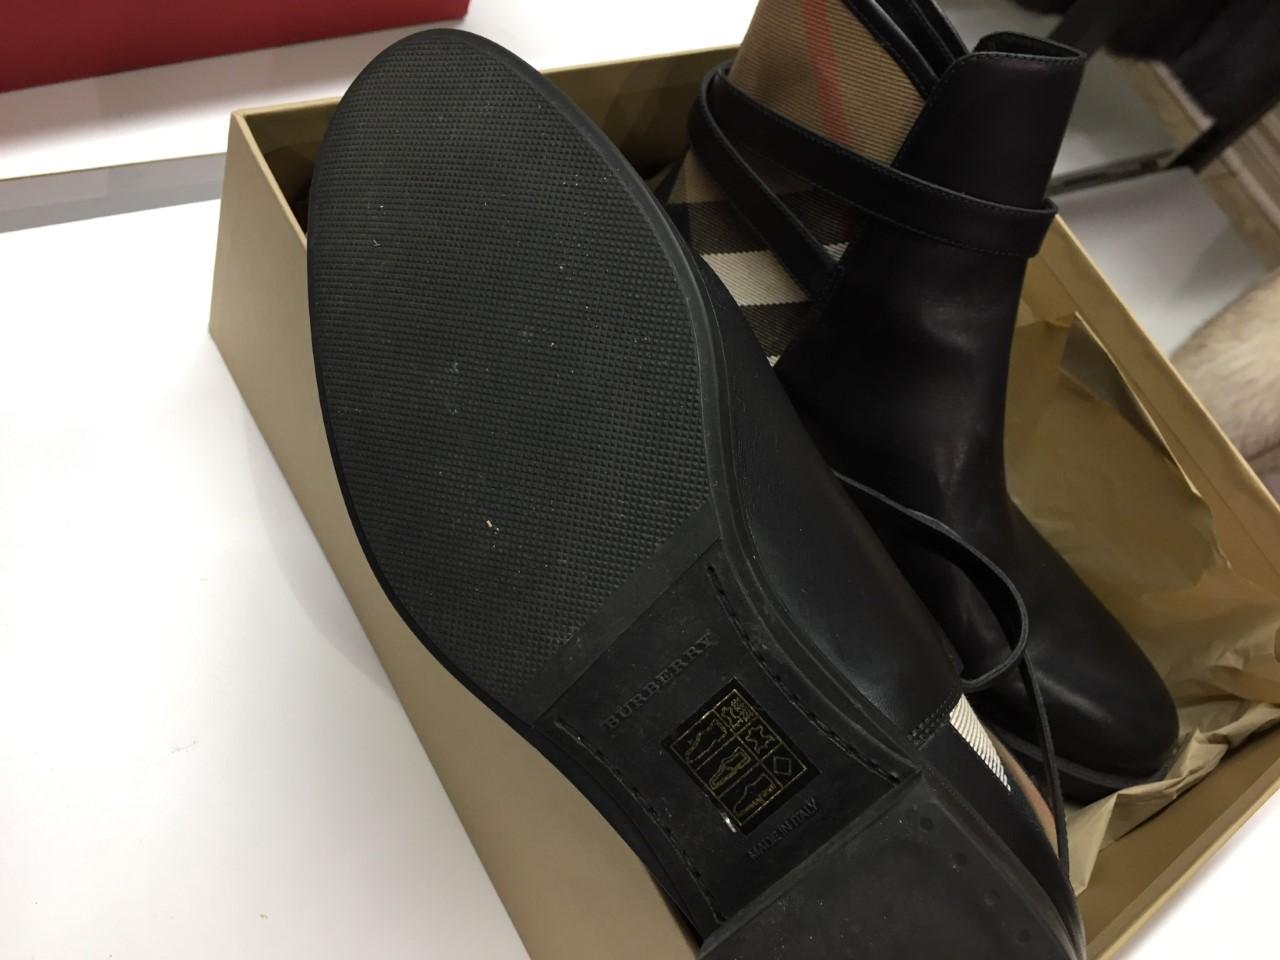 Burberry boots In Excellent Condition For Sale In North York, CA